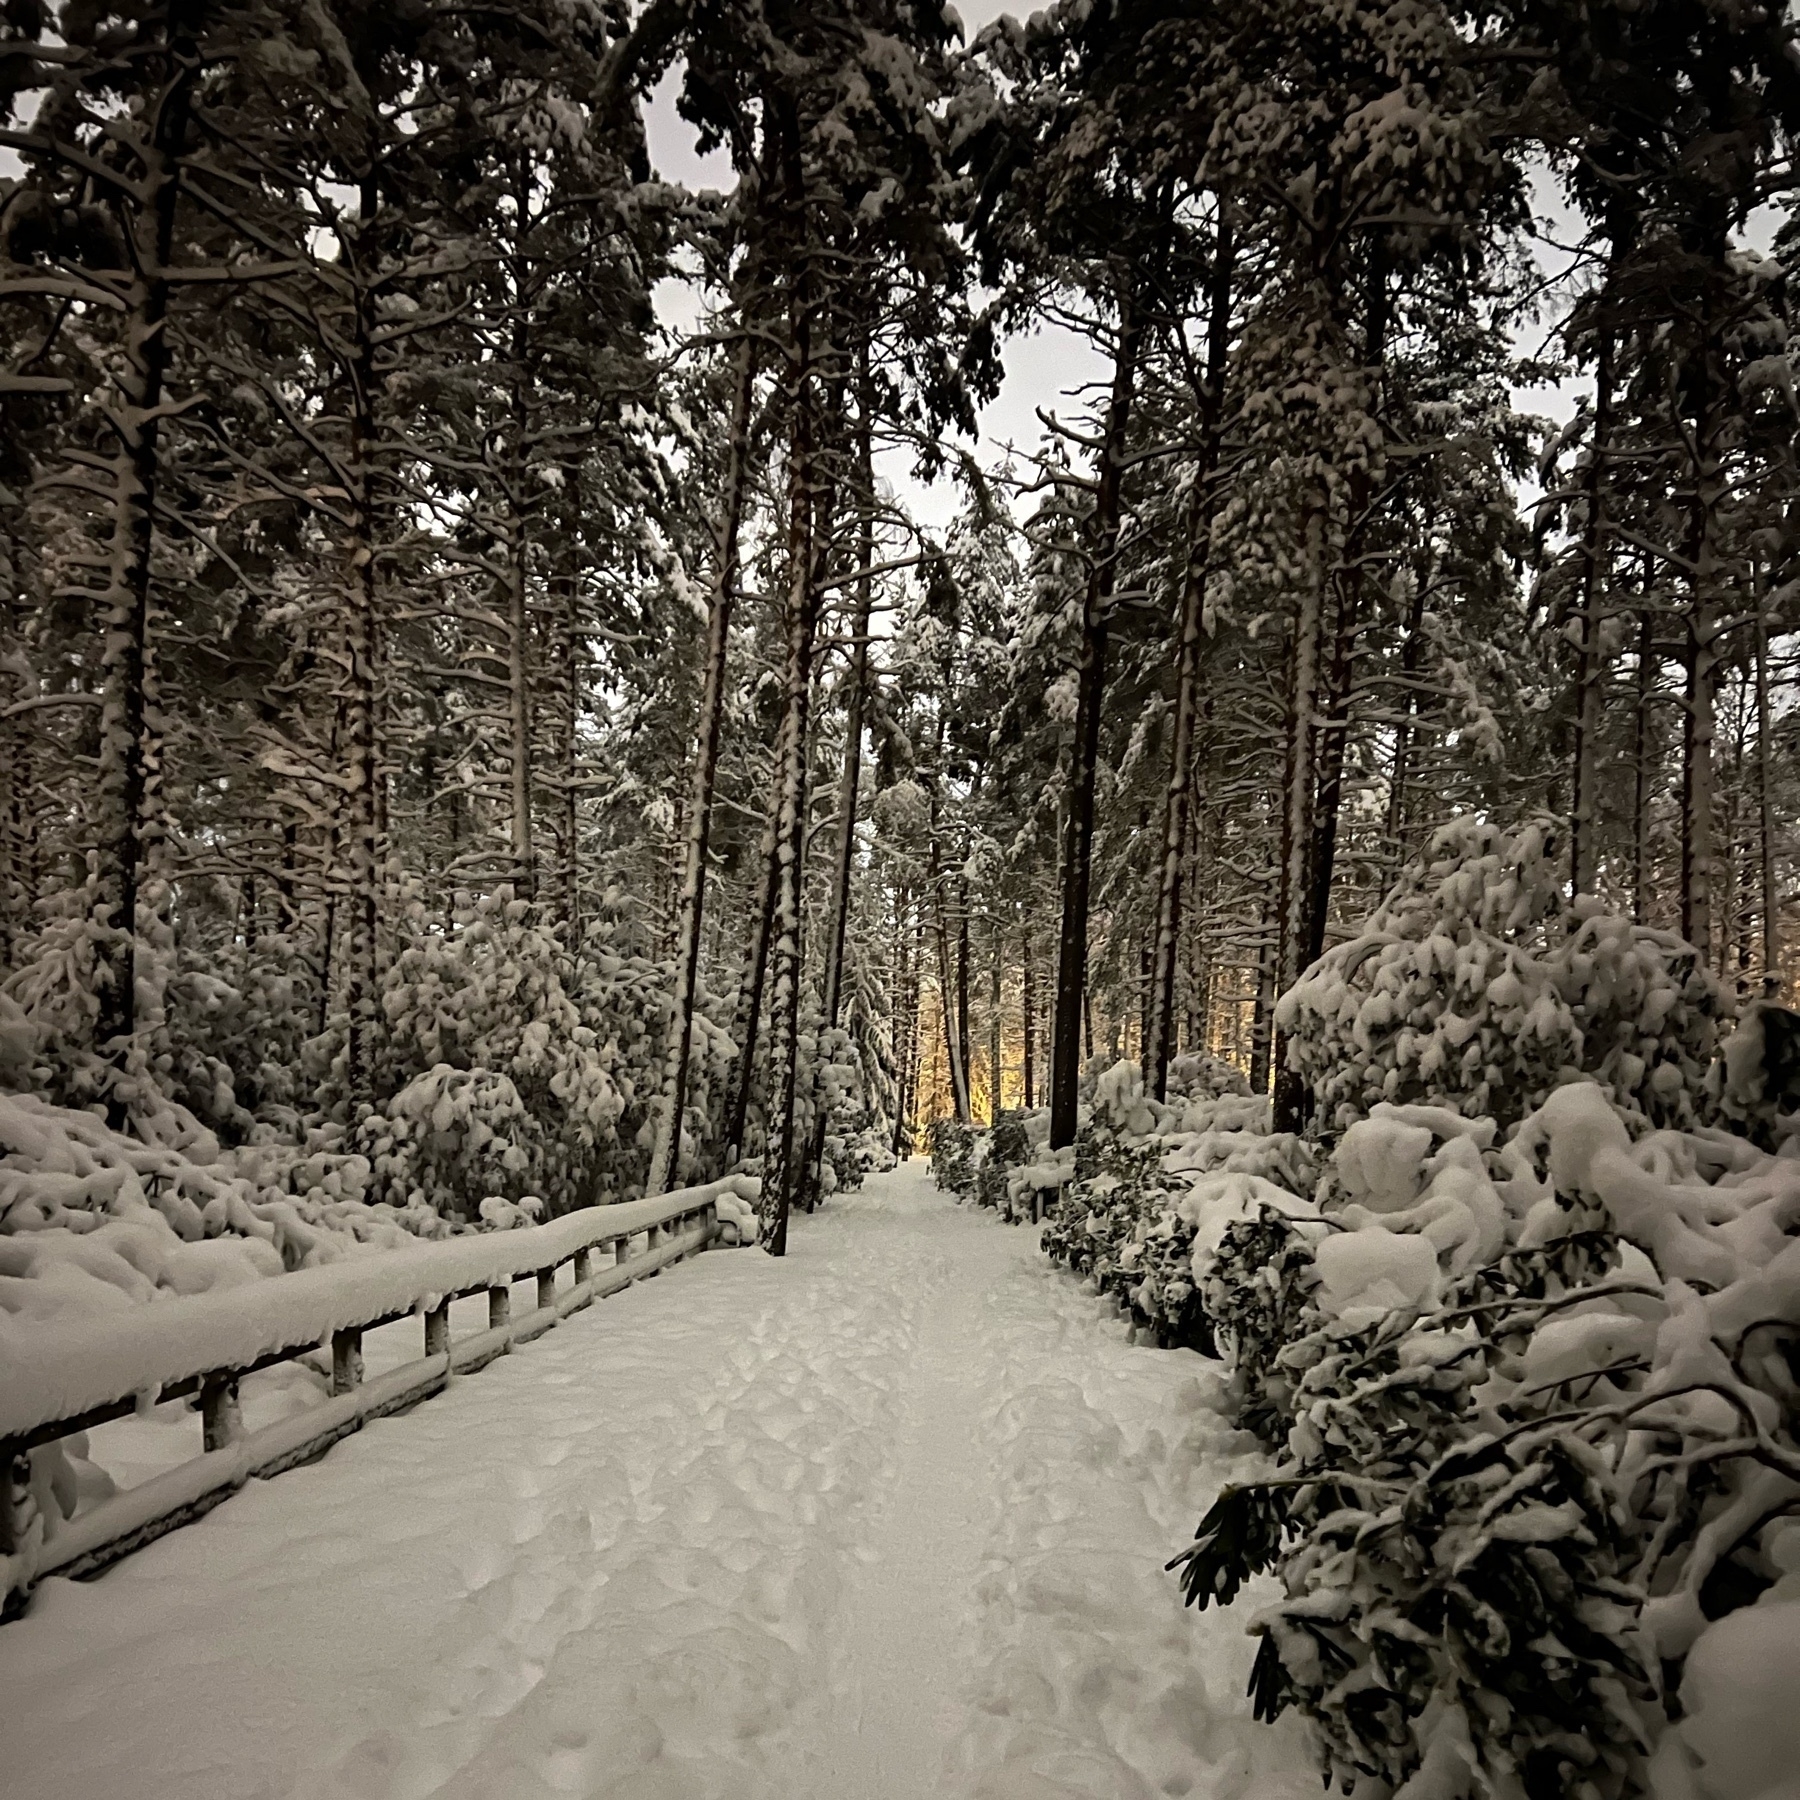 snowy forest path surrounded by trees and snow covered rhododendrons